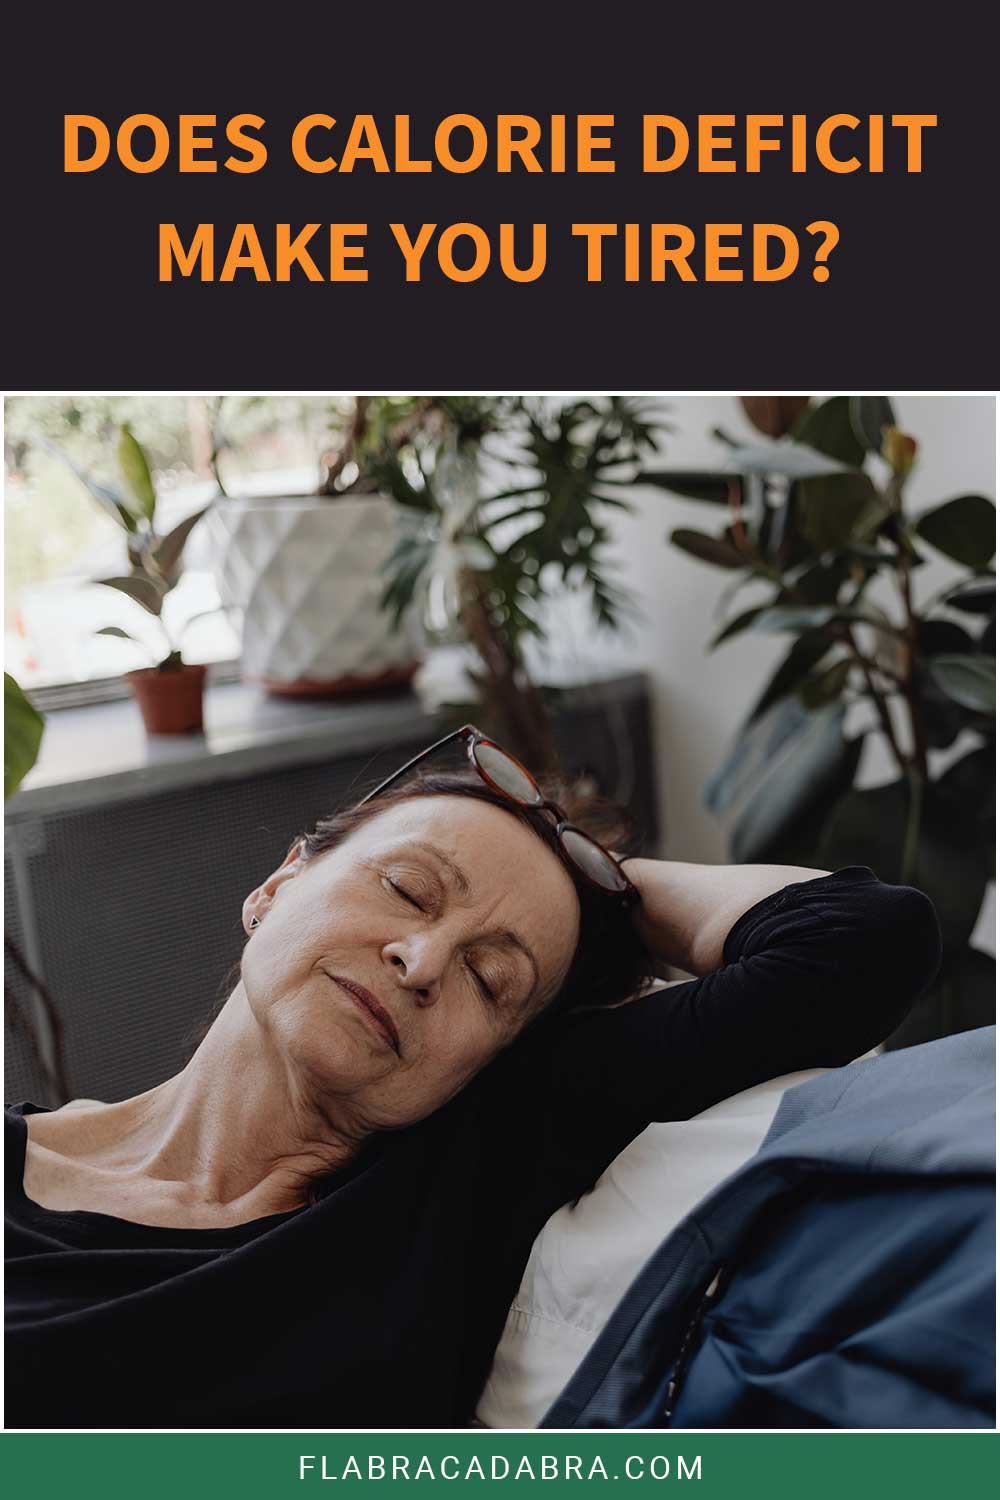 Old woman sleeping on a couch - Does Calorie Deficit Make You Tired?